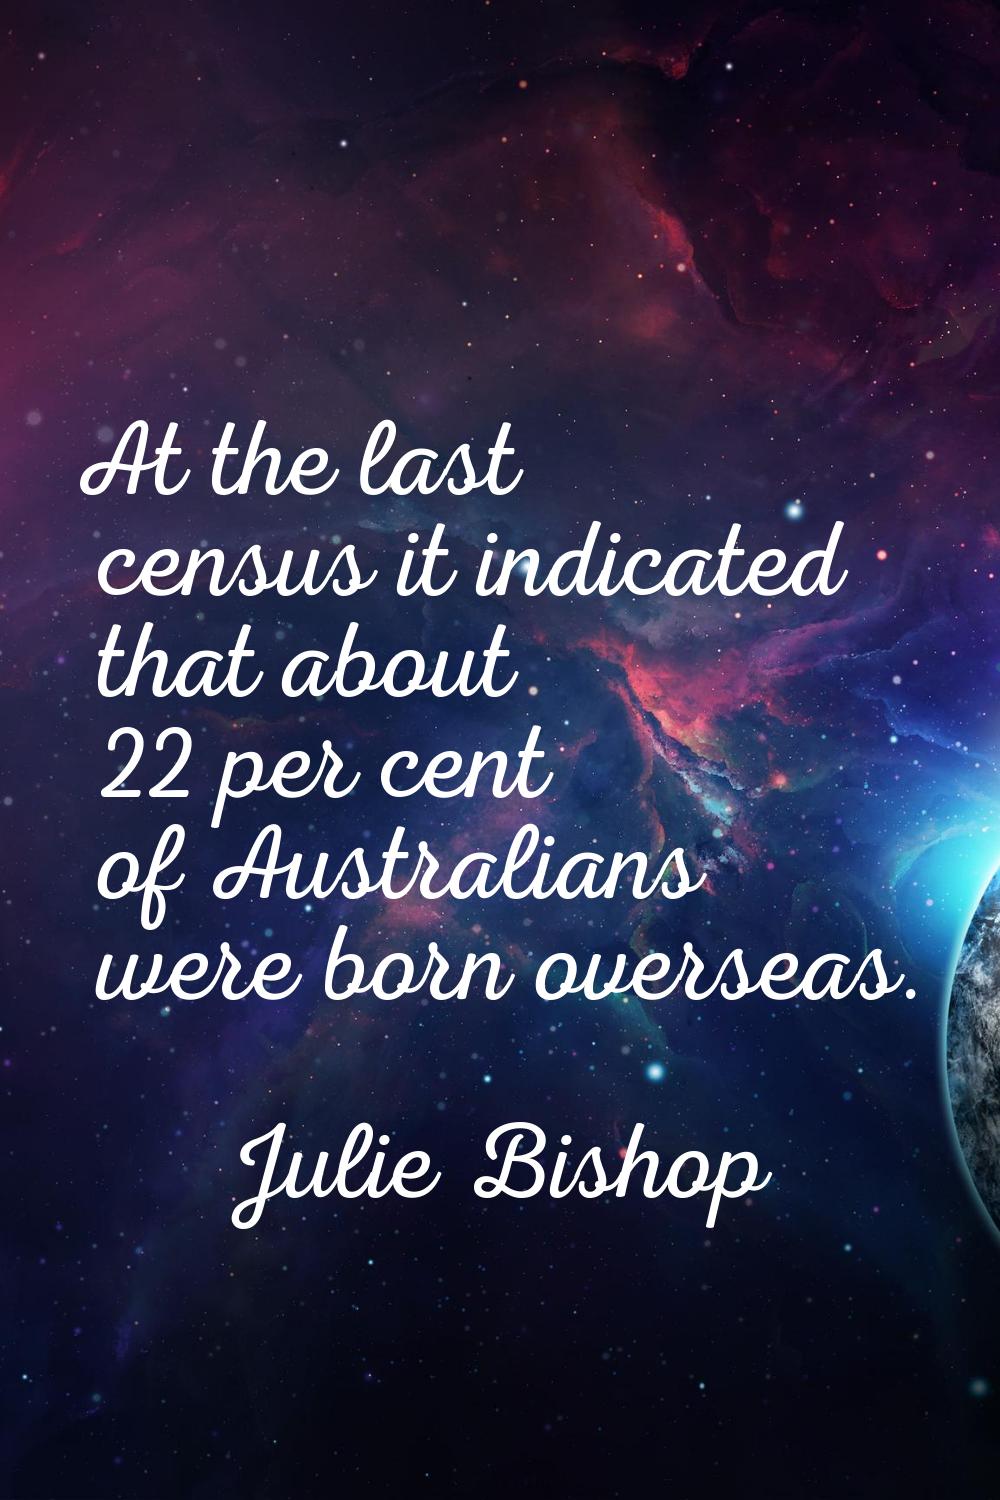 At the last census it indicated that about 22 per cent of Australians were born overseas.